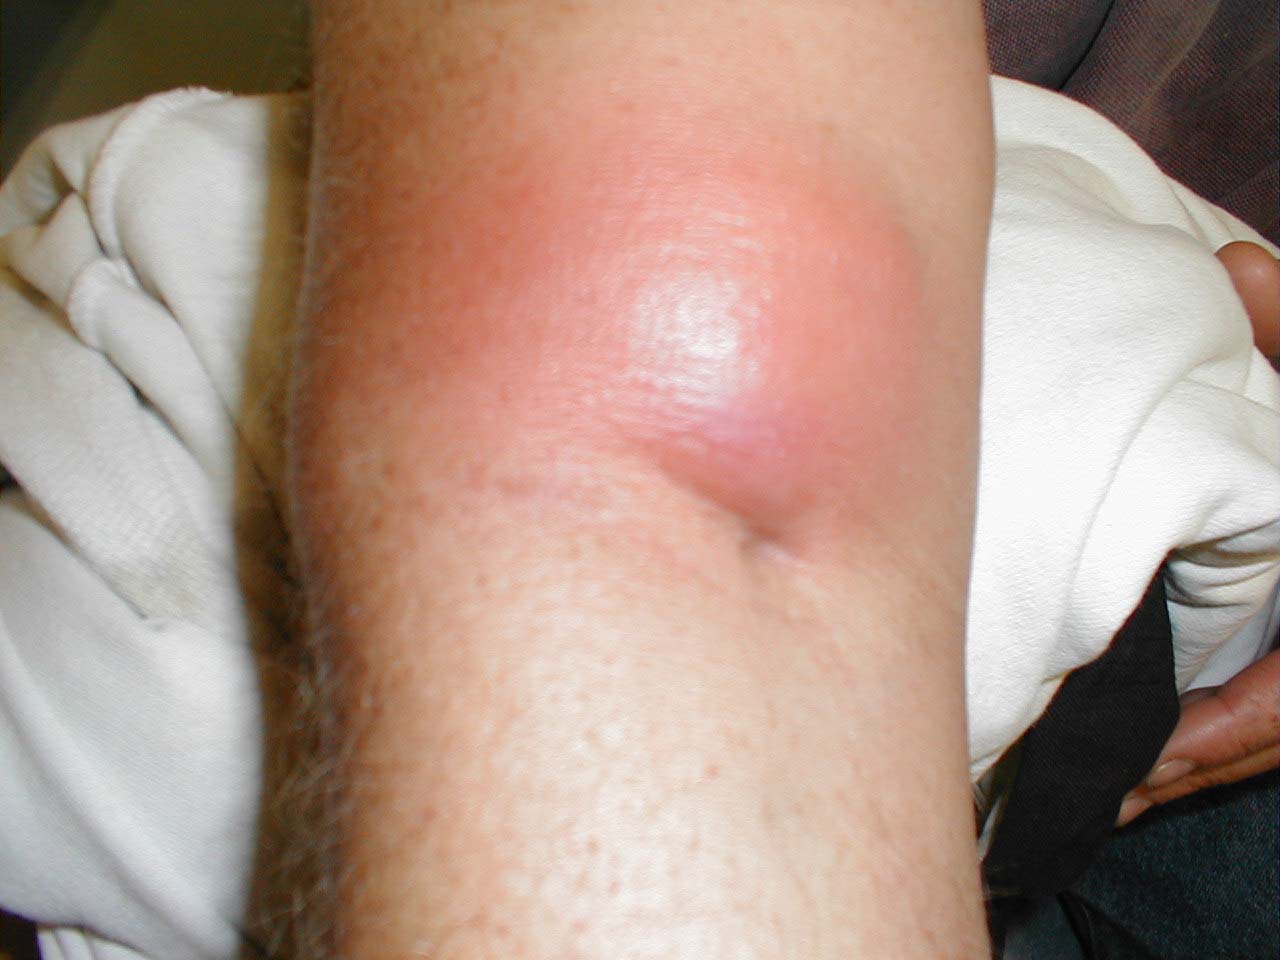 abscess from iv drug use